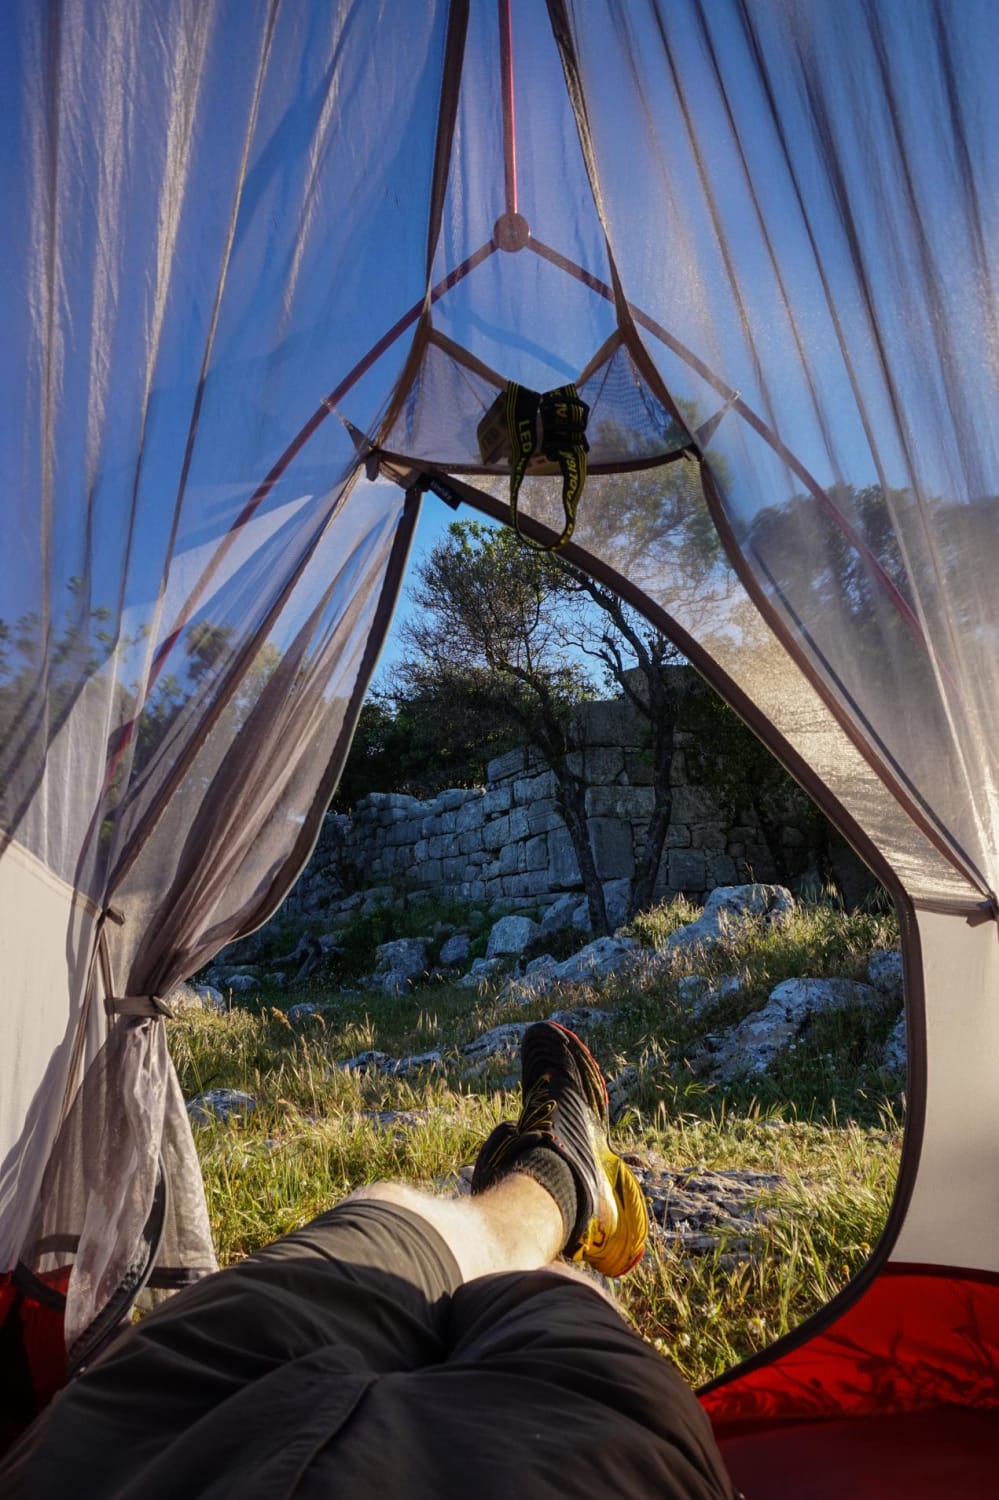 Early morning in my tent on main square in ruins of ancient city Belos. Lycian way Turkey. One of the greatests nights in my life!